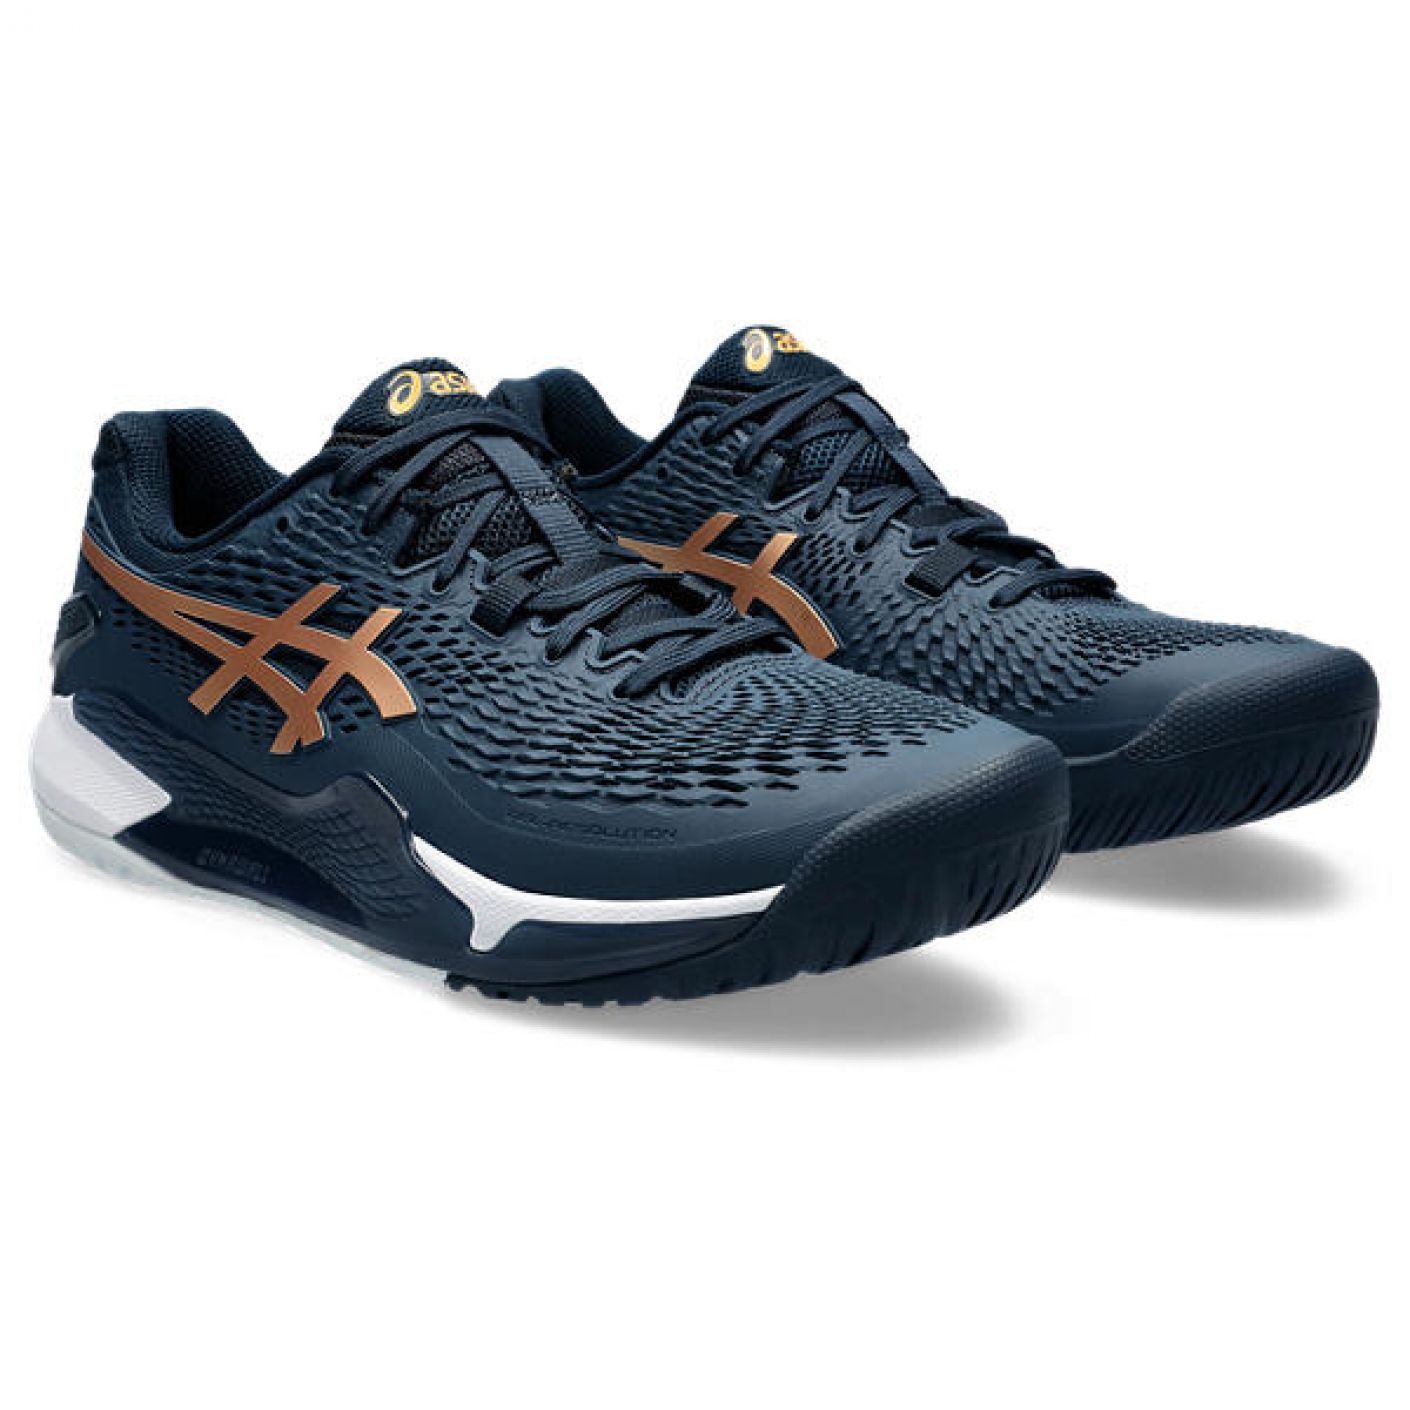 Asics Gel Resolution 9 French Blue/Pure Gold for Men